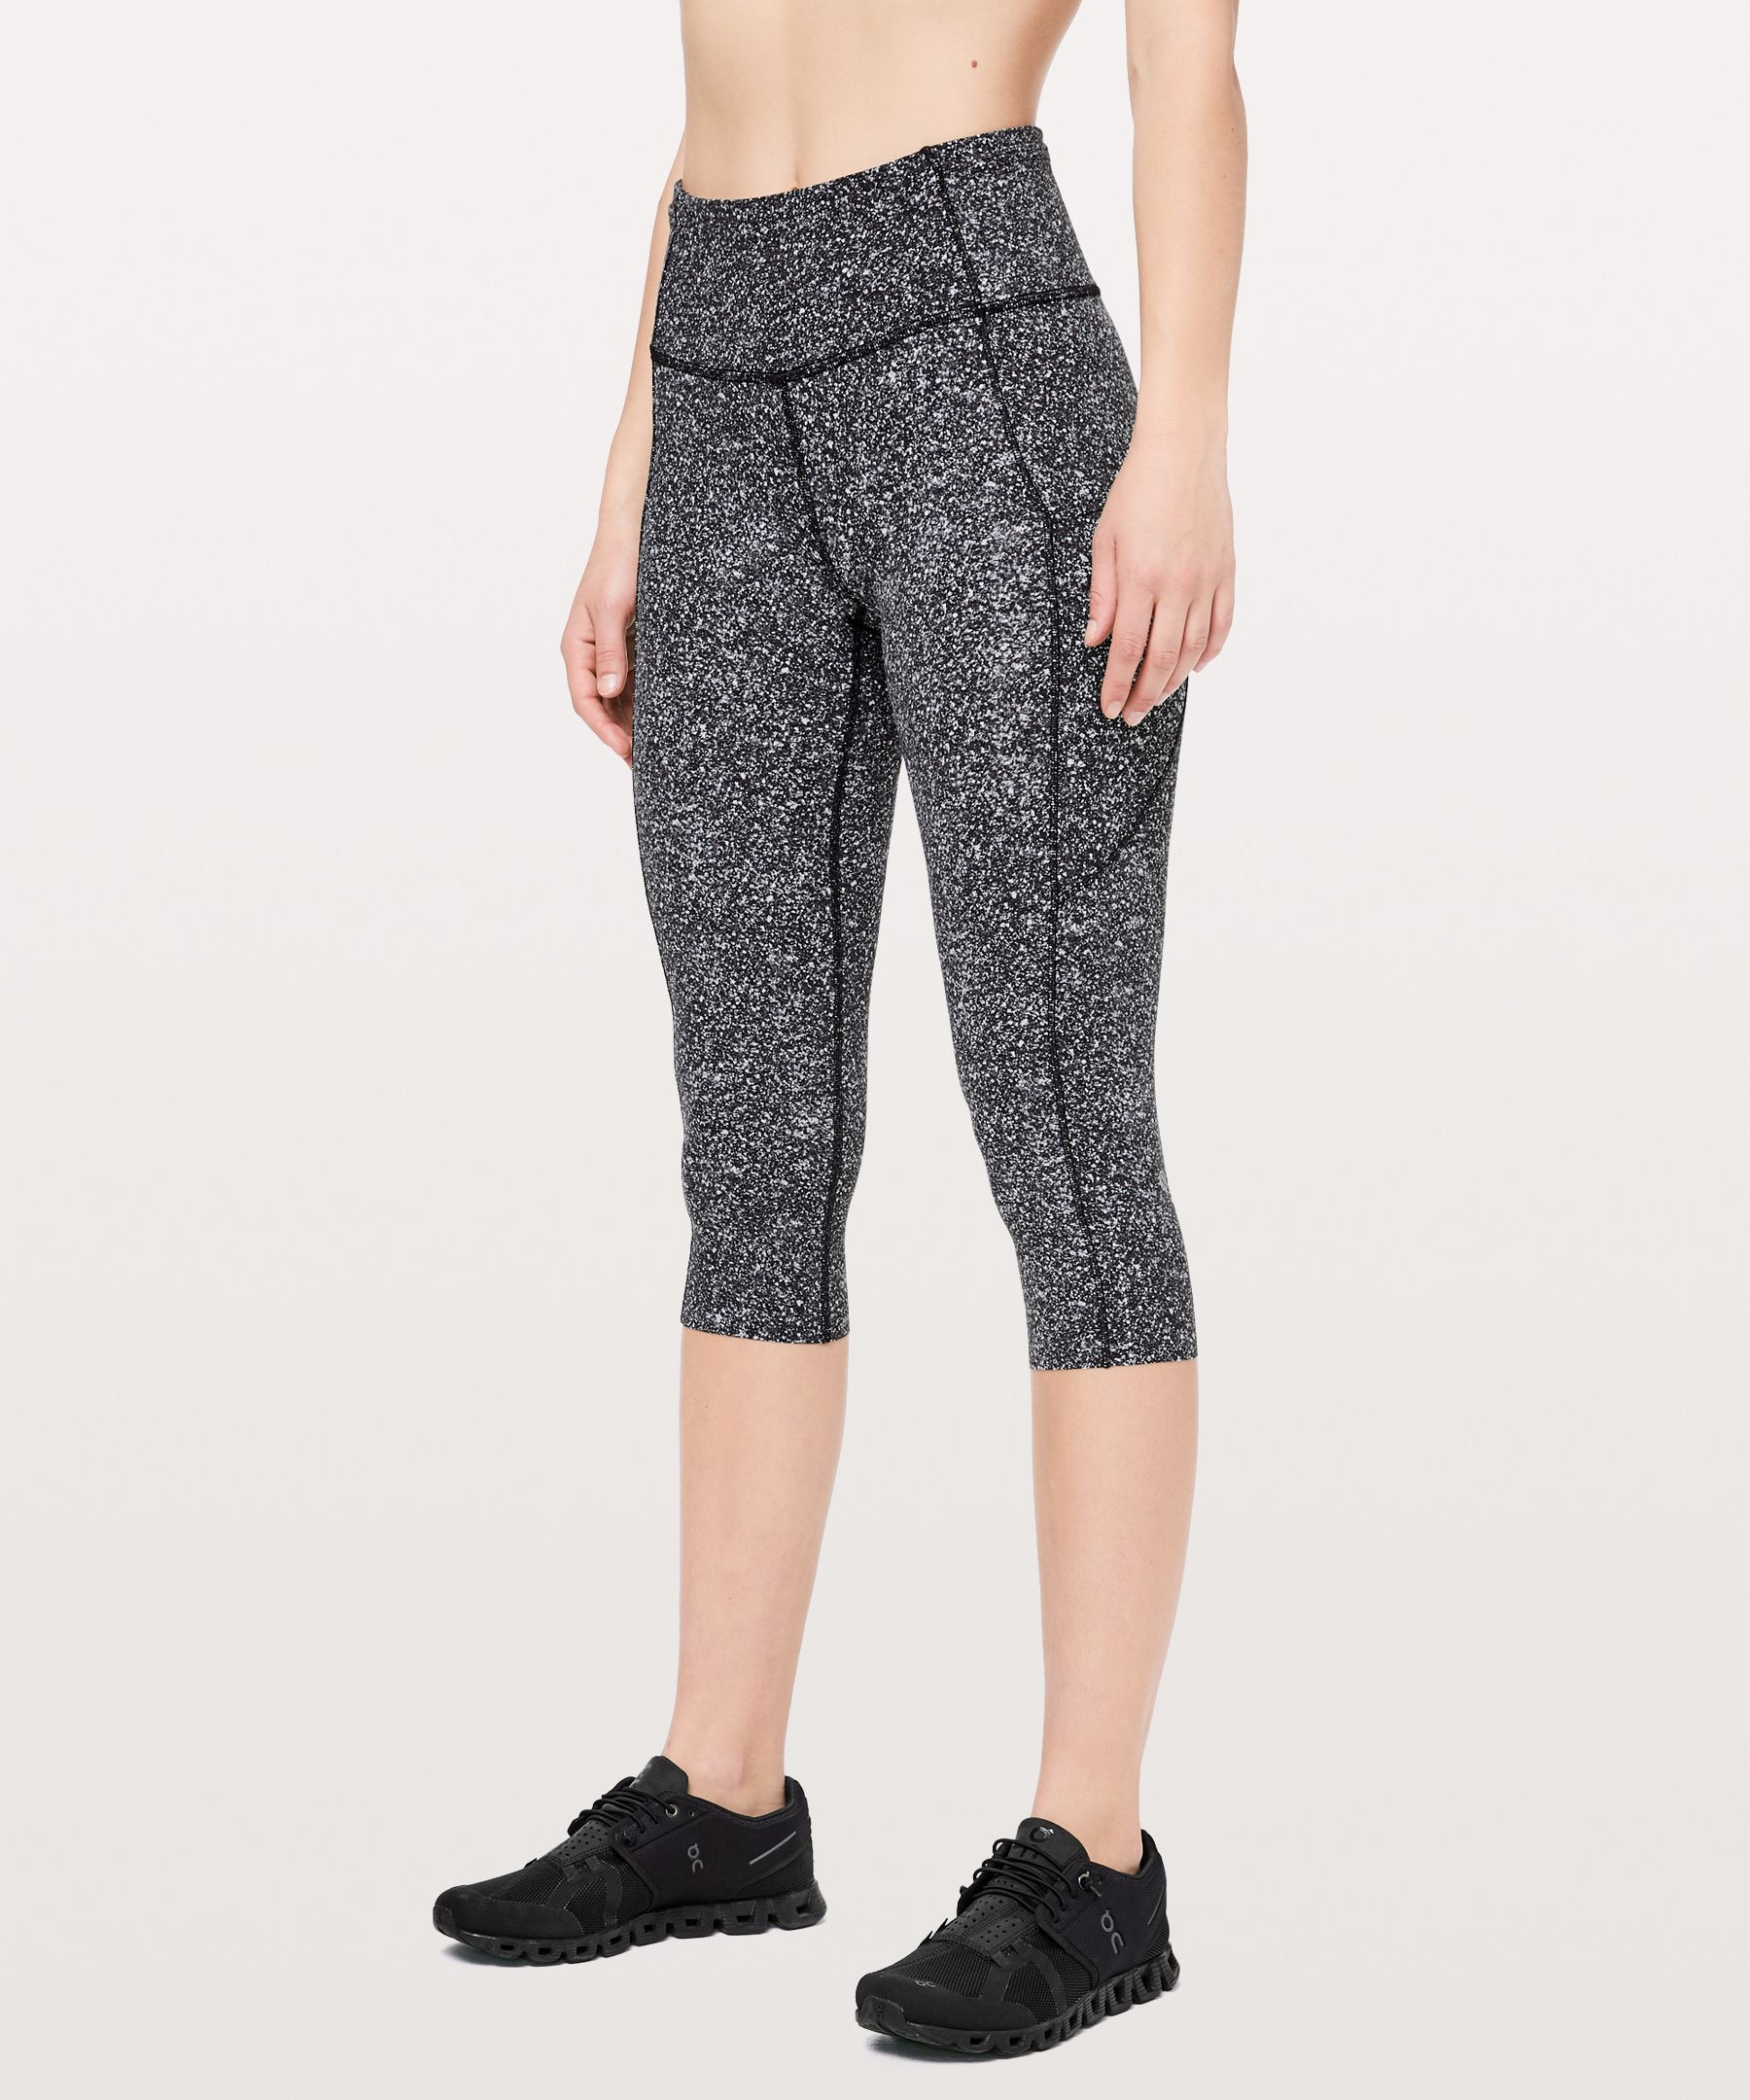 Fast and Free Reflective High-Rise Crop 19, Women's Capris